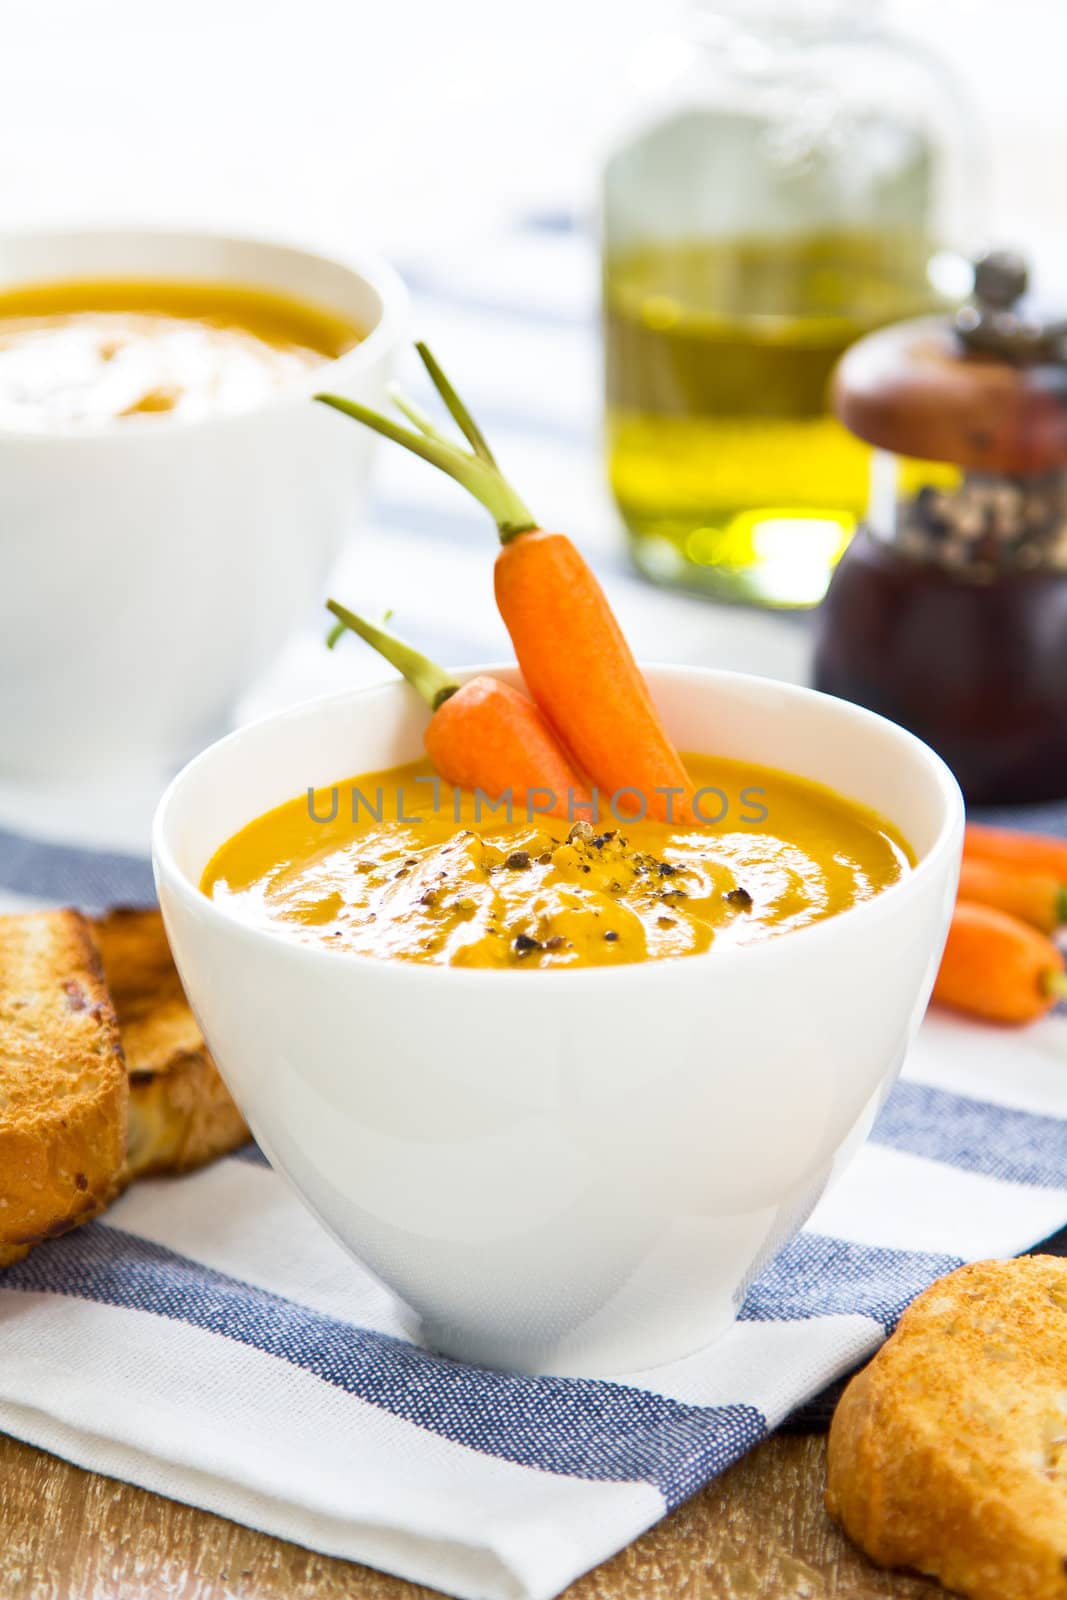 Carrot soup by some toasts and baby carrot